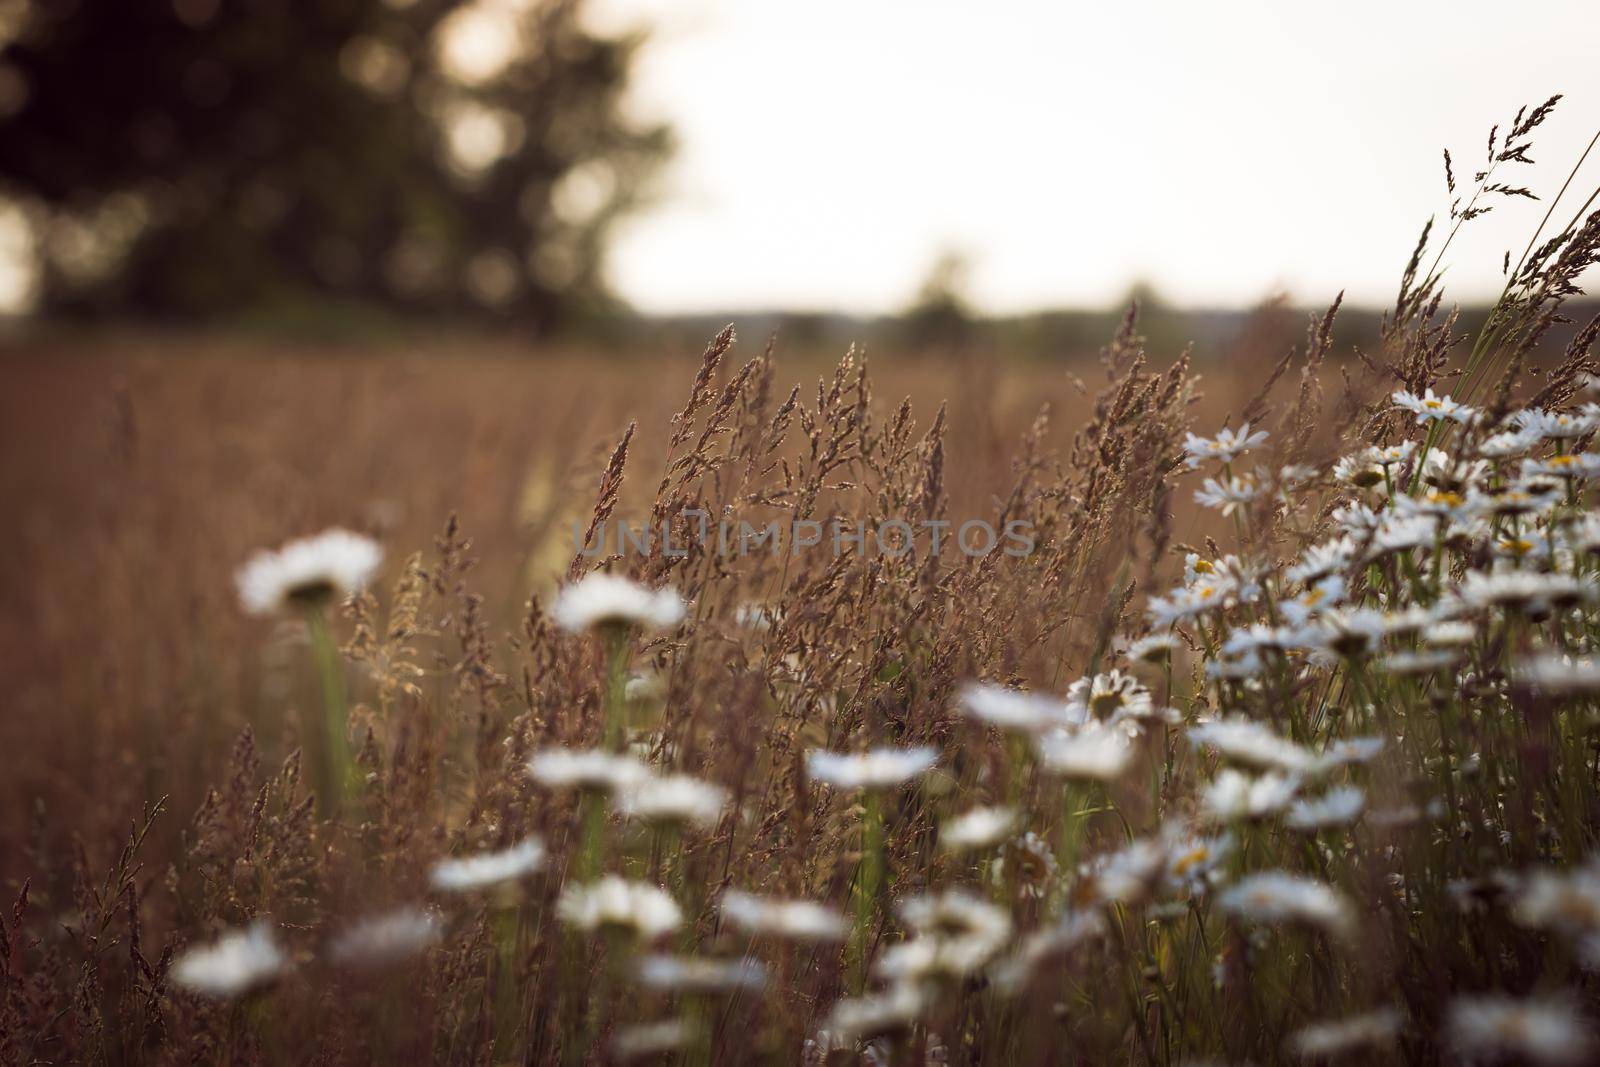 Daisies in the field at summer sunset by clusterx